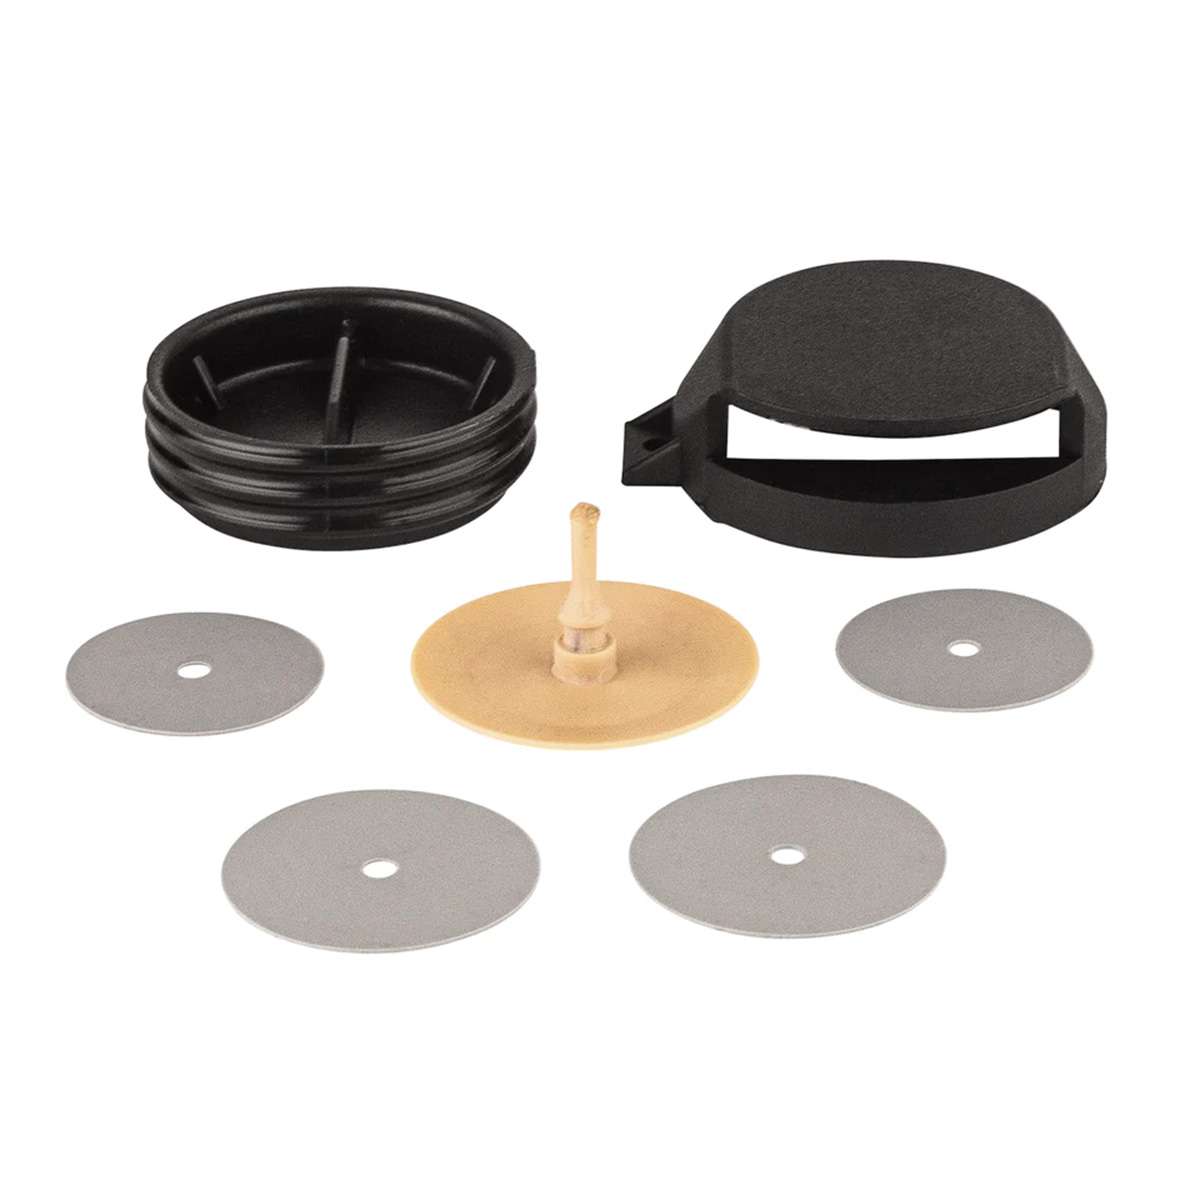 MIRA Safety Gas Mask Replacement Parts Deluxe Kit